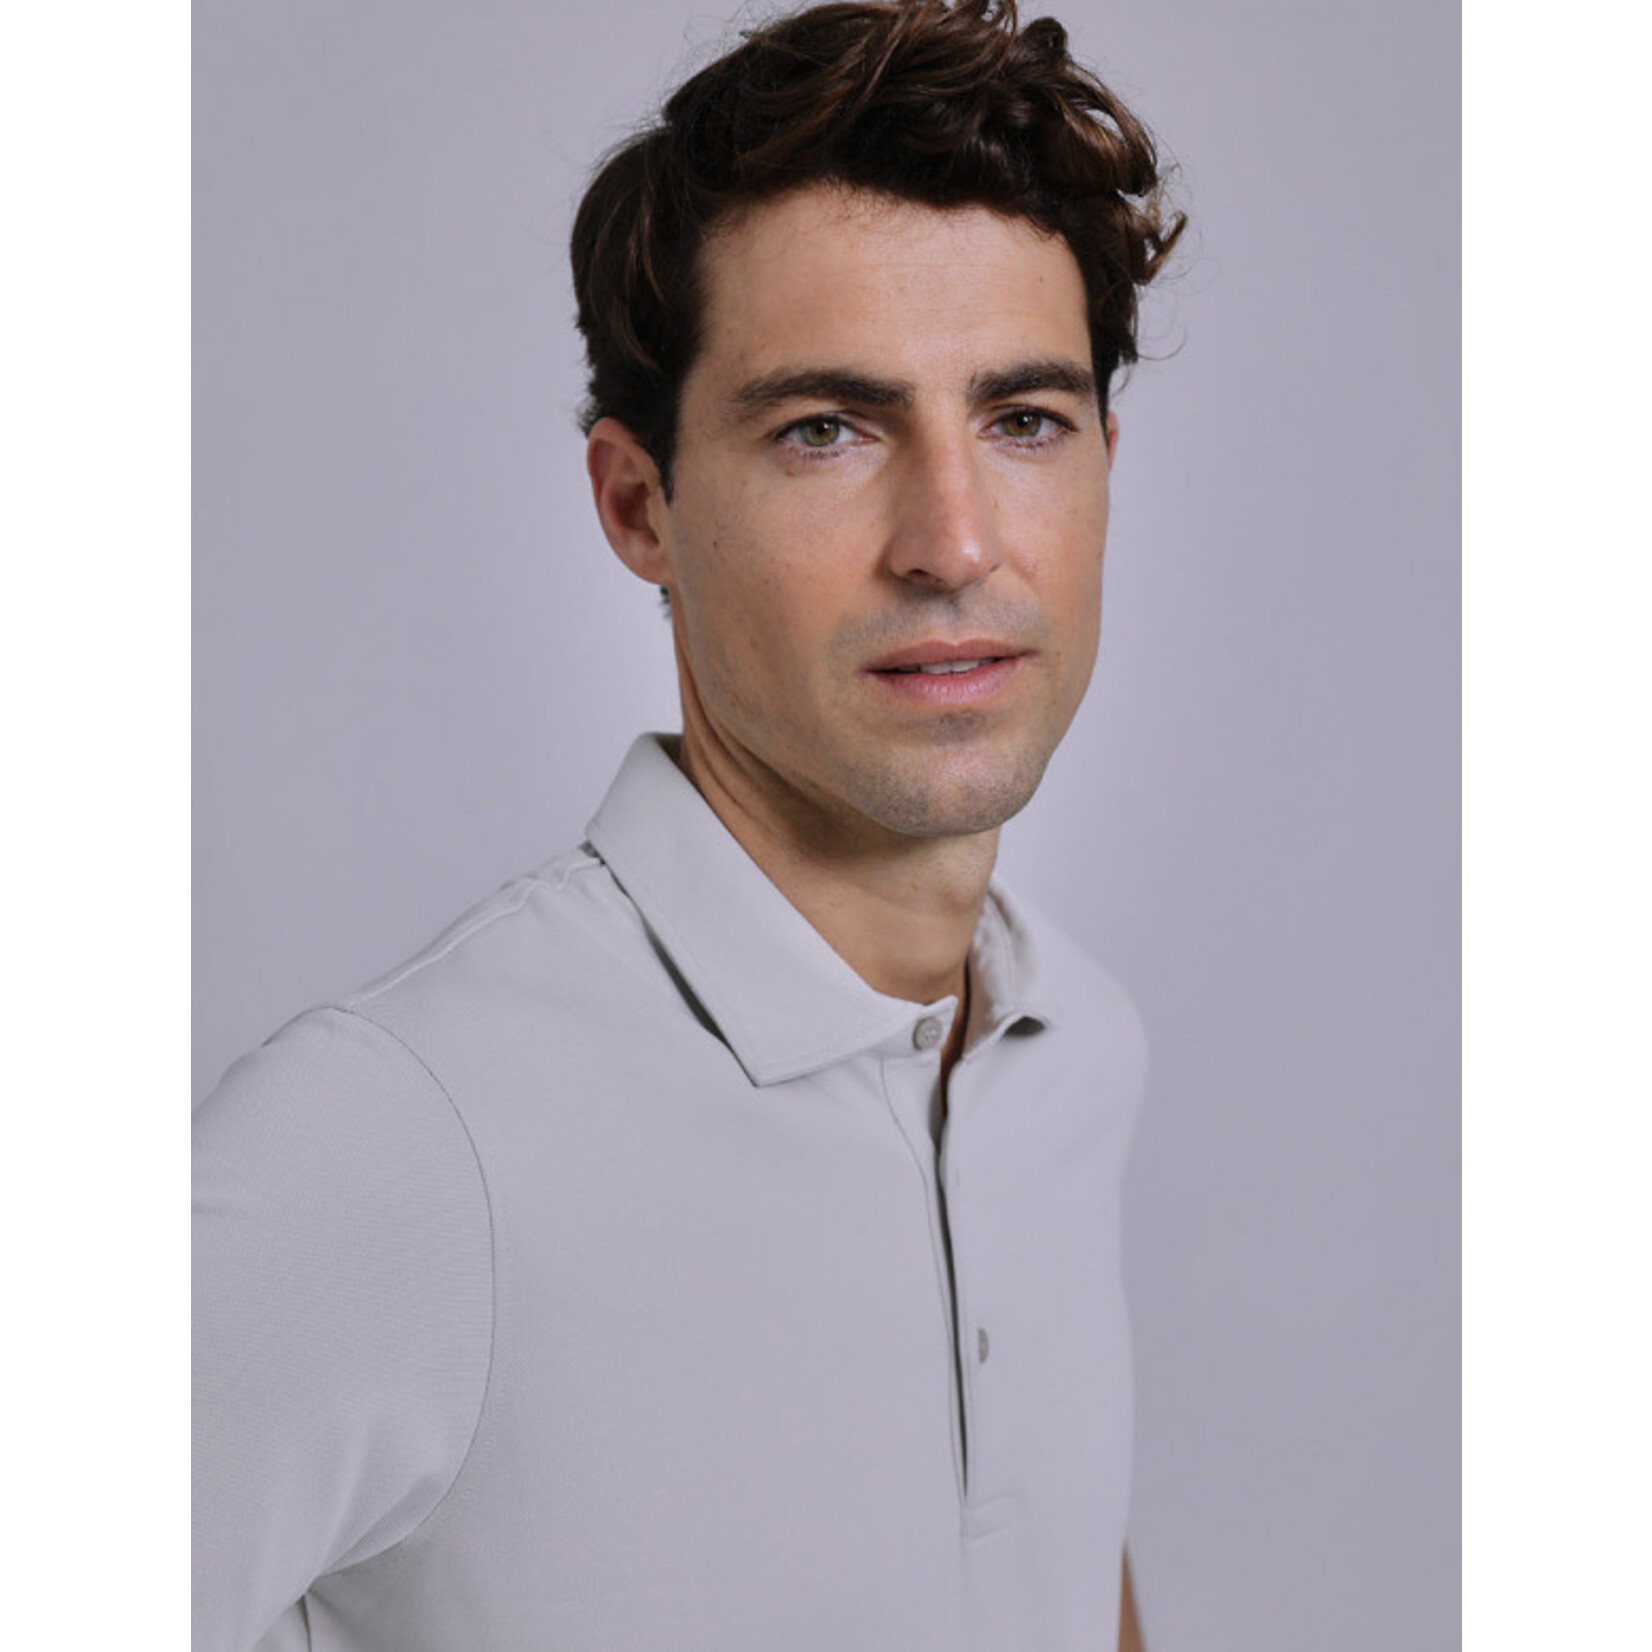 Batech regular fit polo clean essential athenes